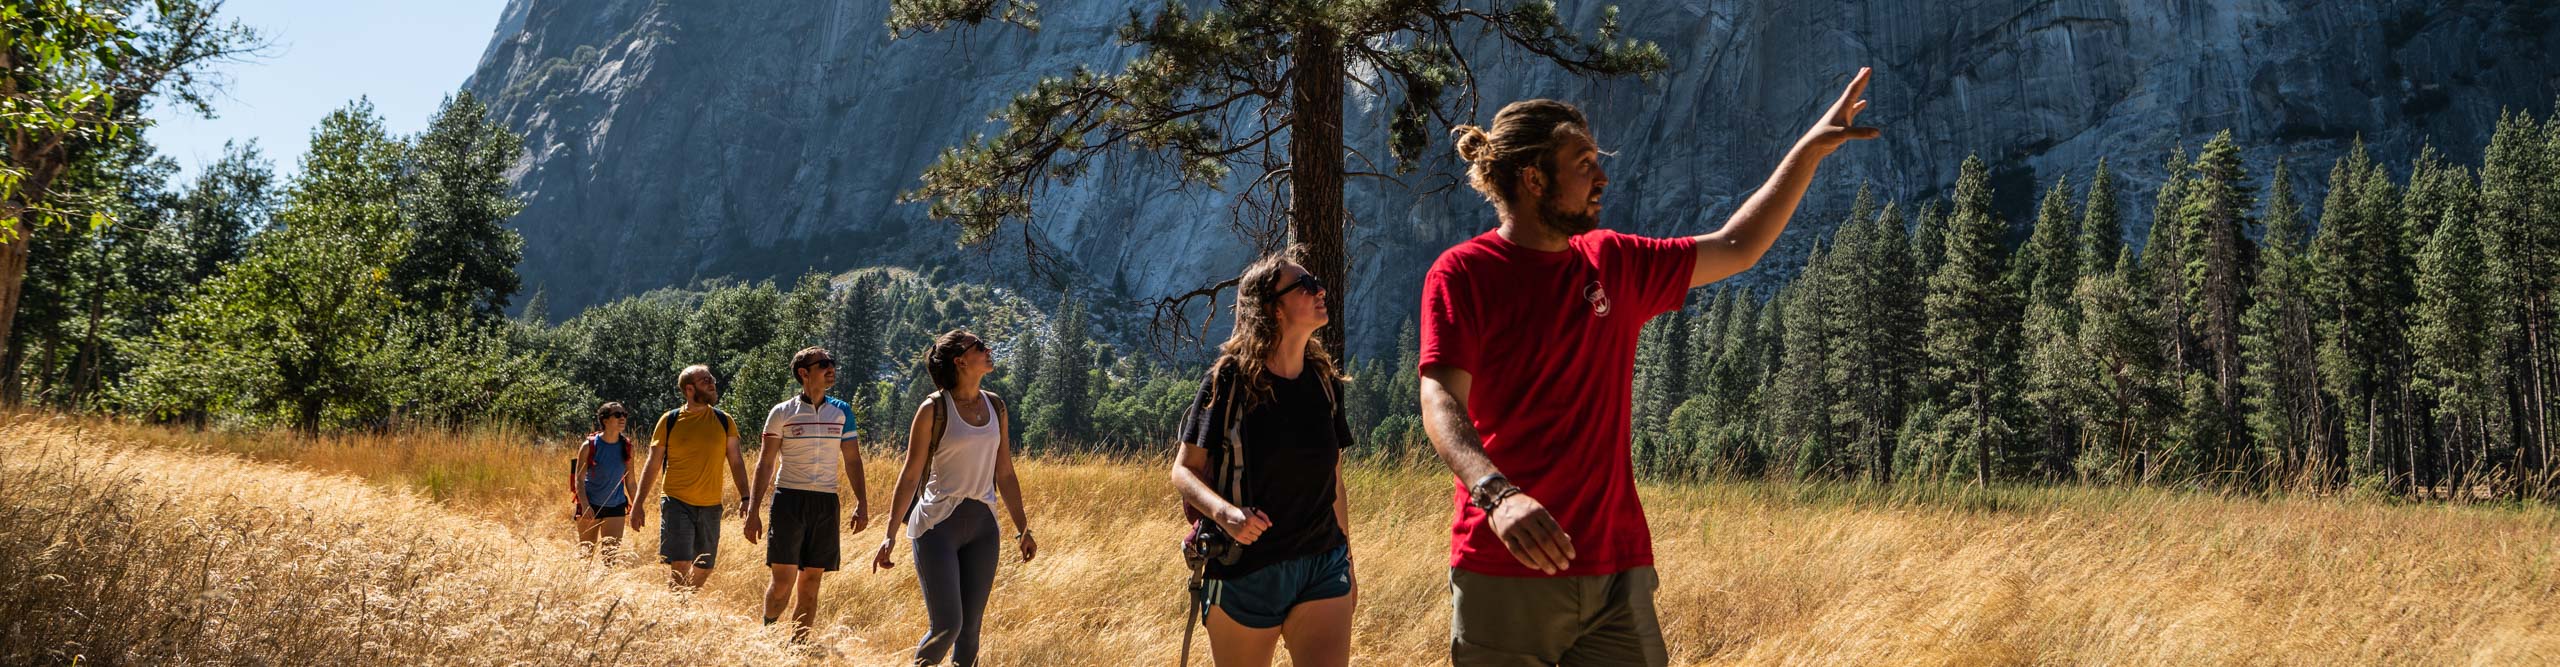 Tour guide and group walking though the long grass next to the mountain, Yosemite National Park, USA